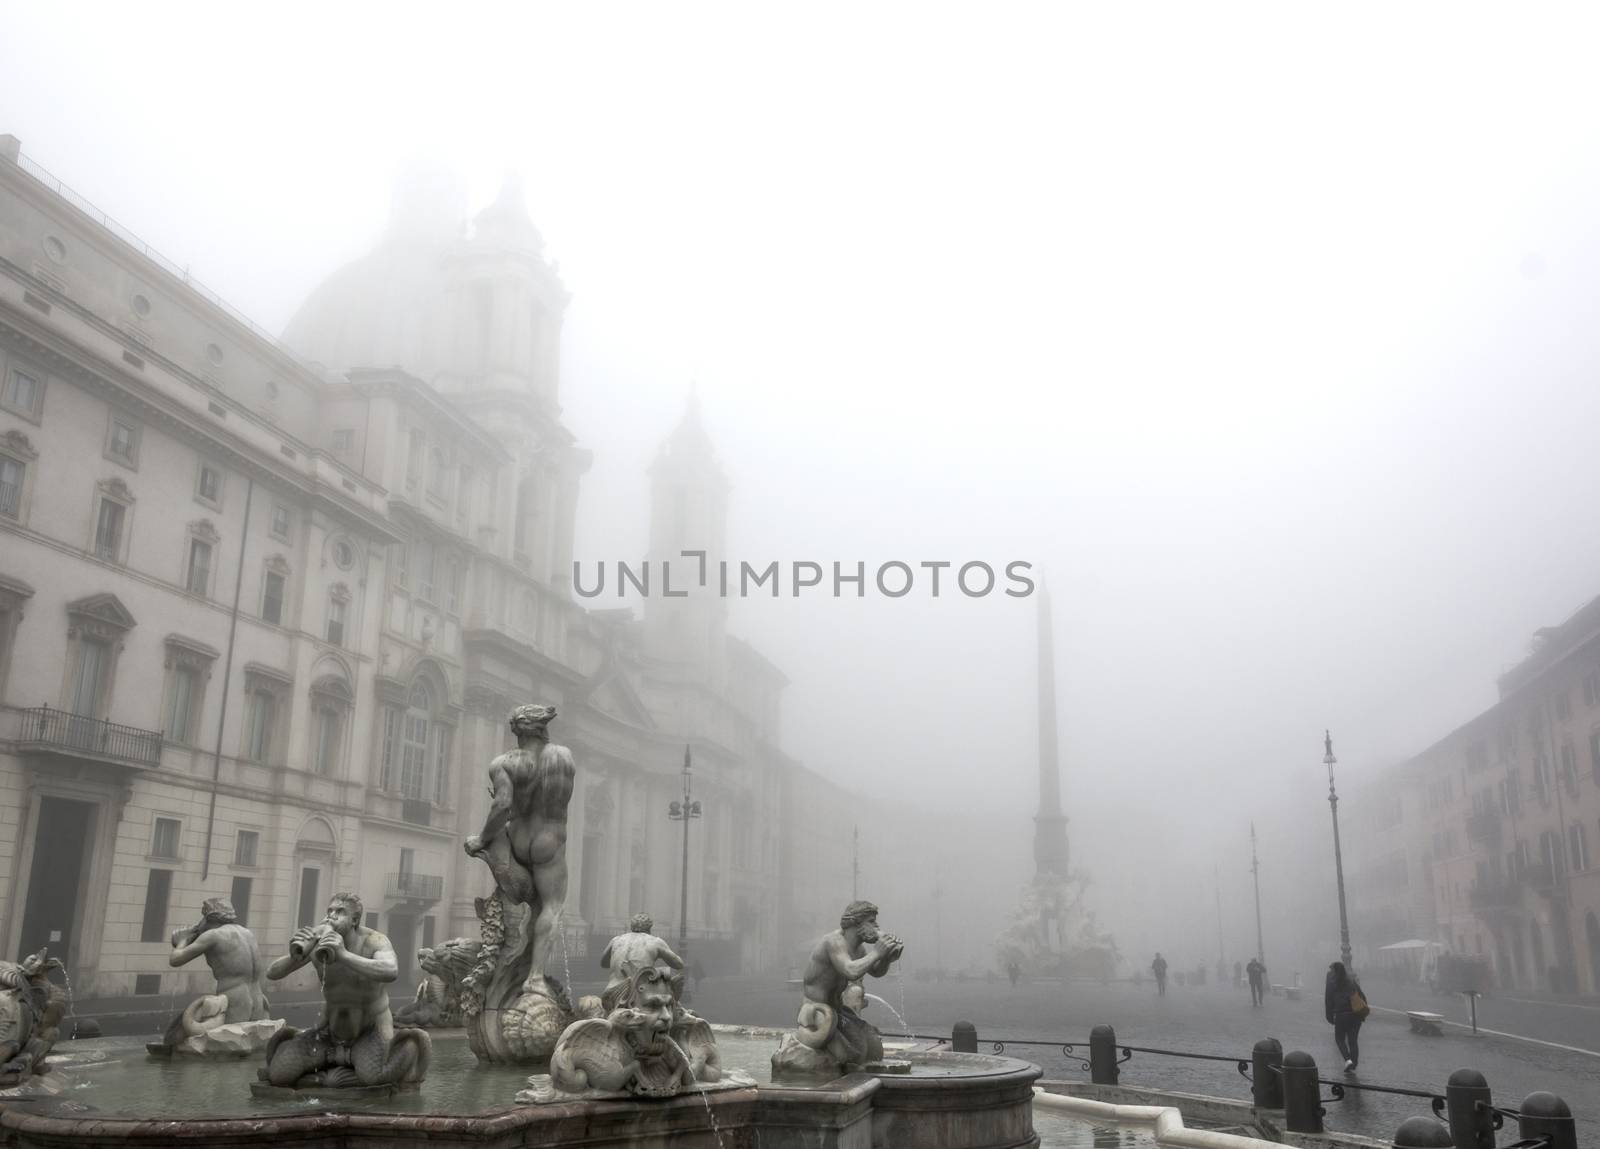 Rome, Italy, 28 jan 2016: Piazza Navona wrapped in an unusual fog